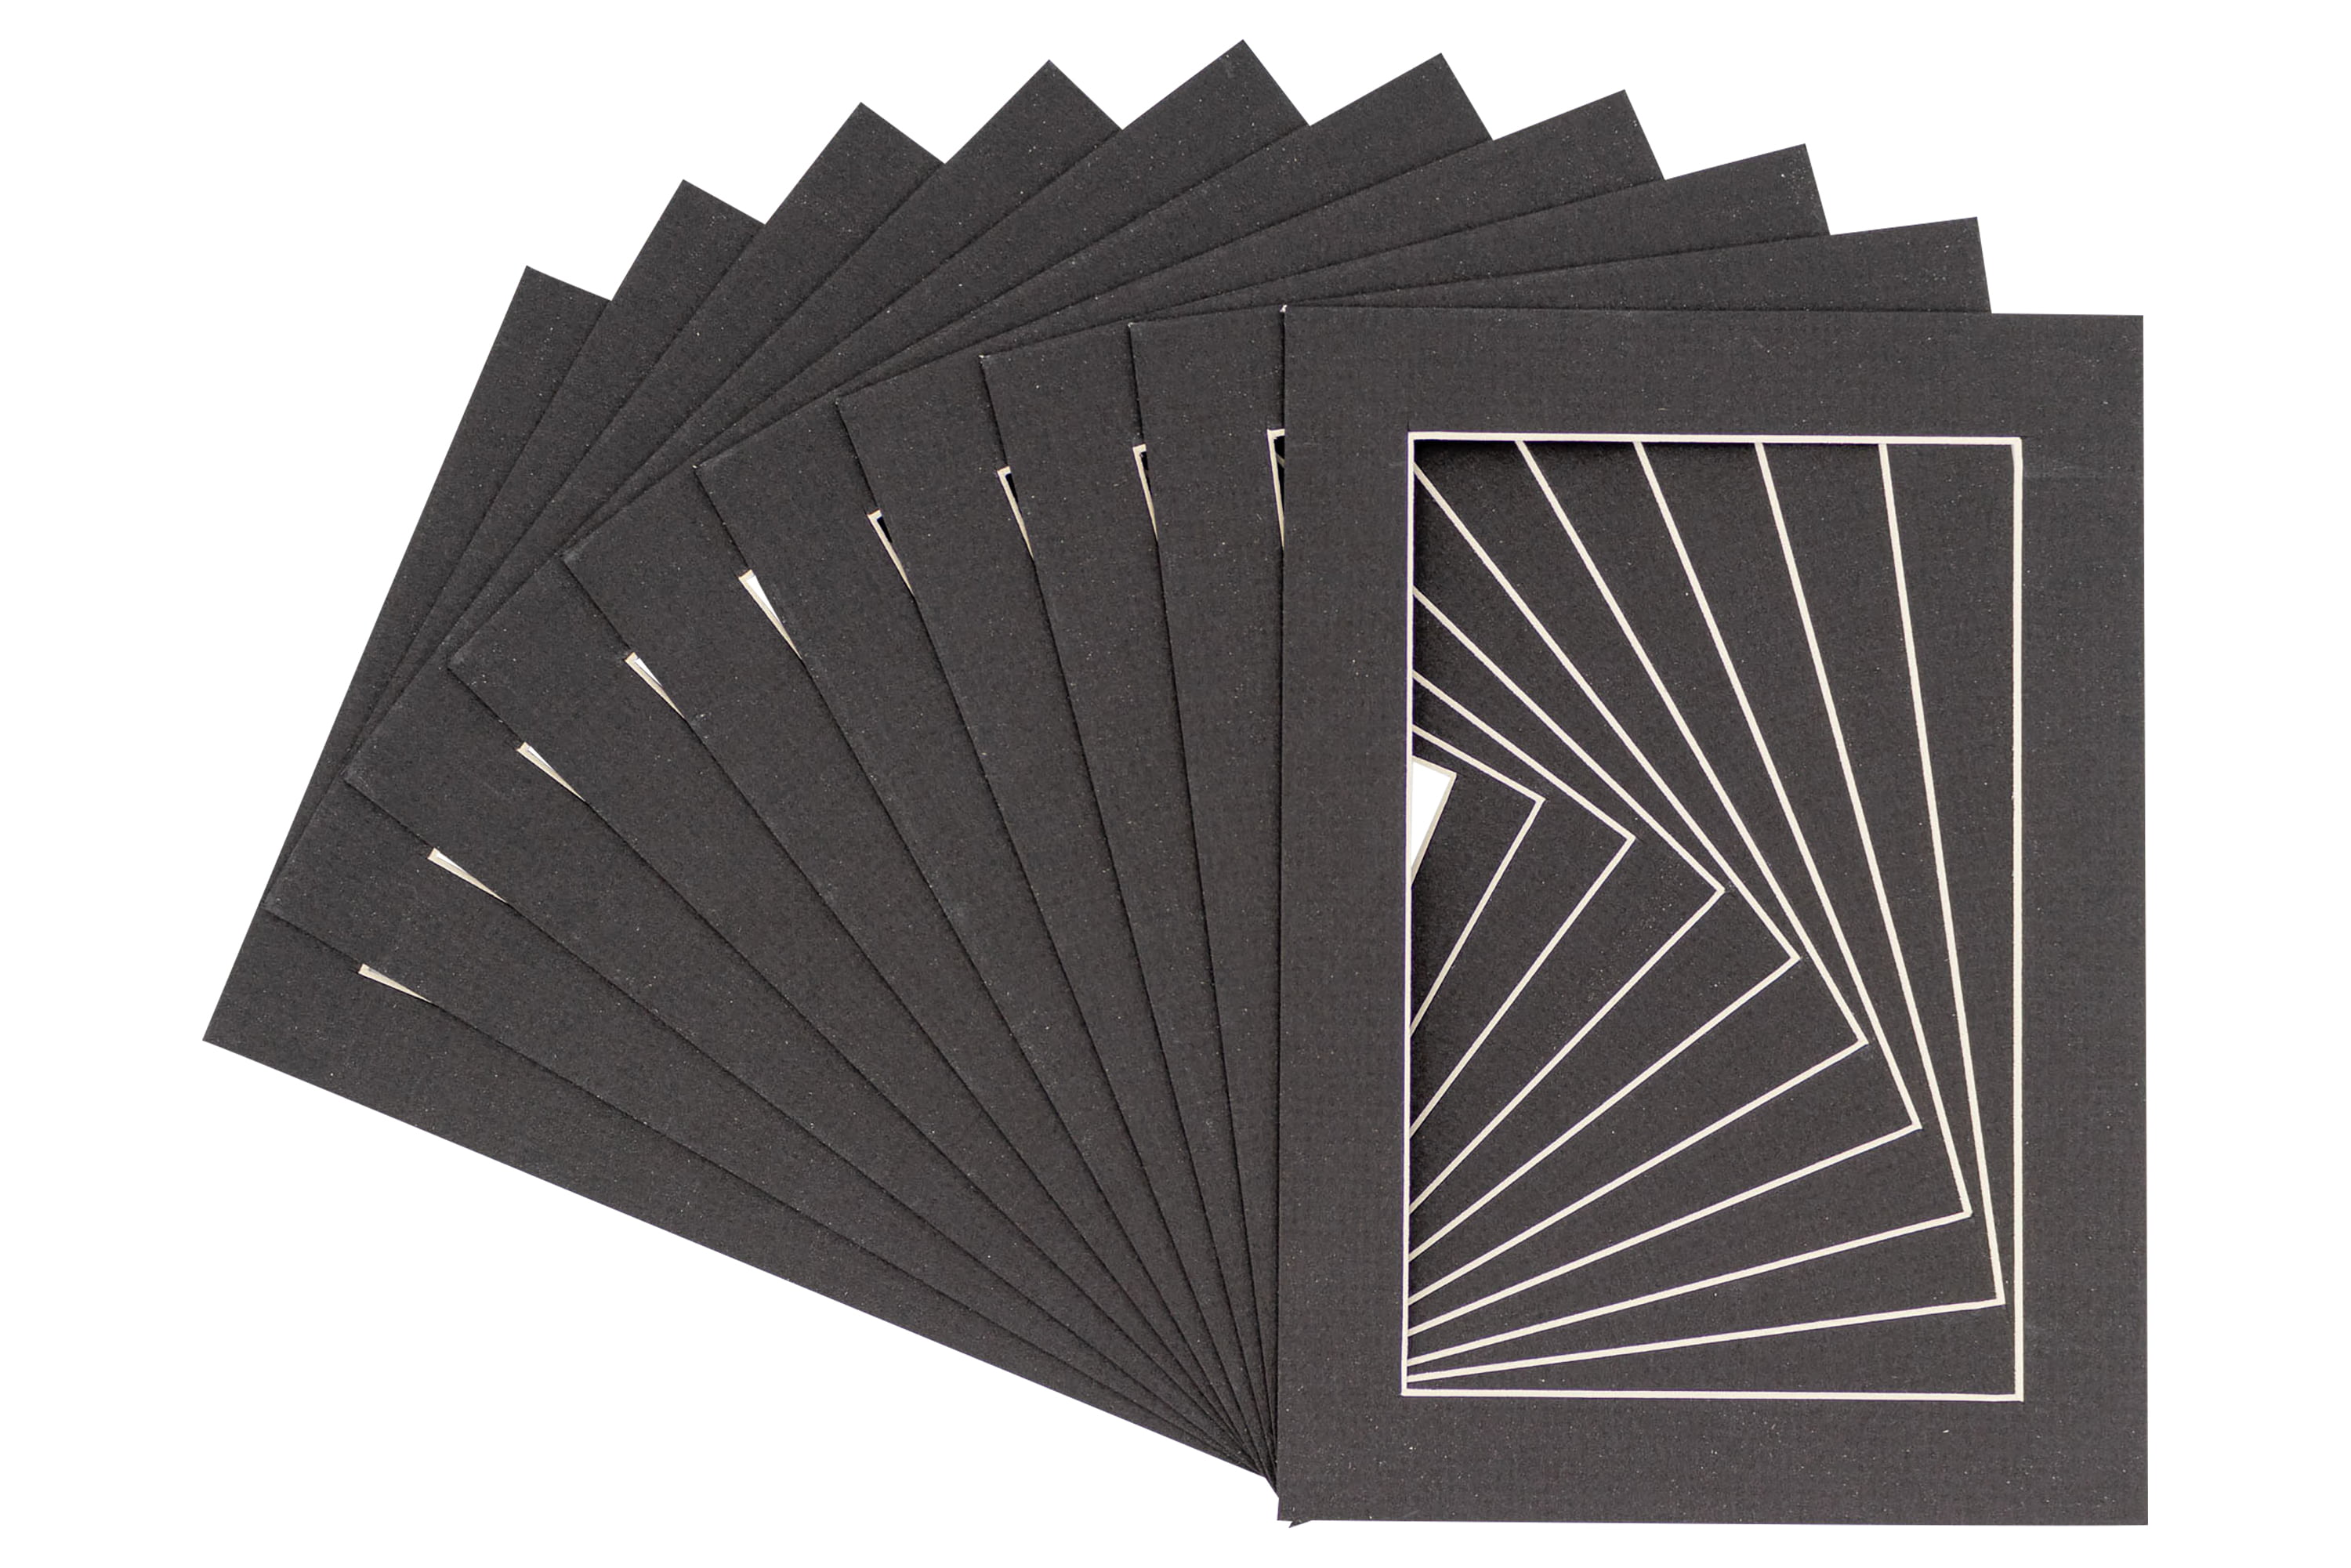 Pack of 100, 8x10 Pre-cut Mat with Blackcore fits 5x7 Picture + Backing +  Bags.